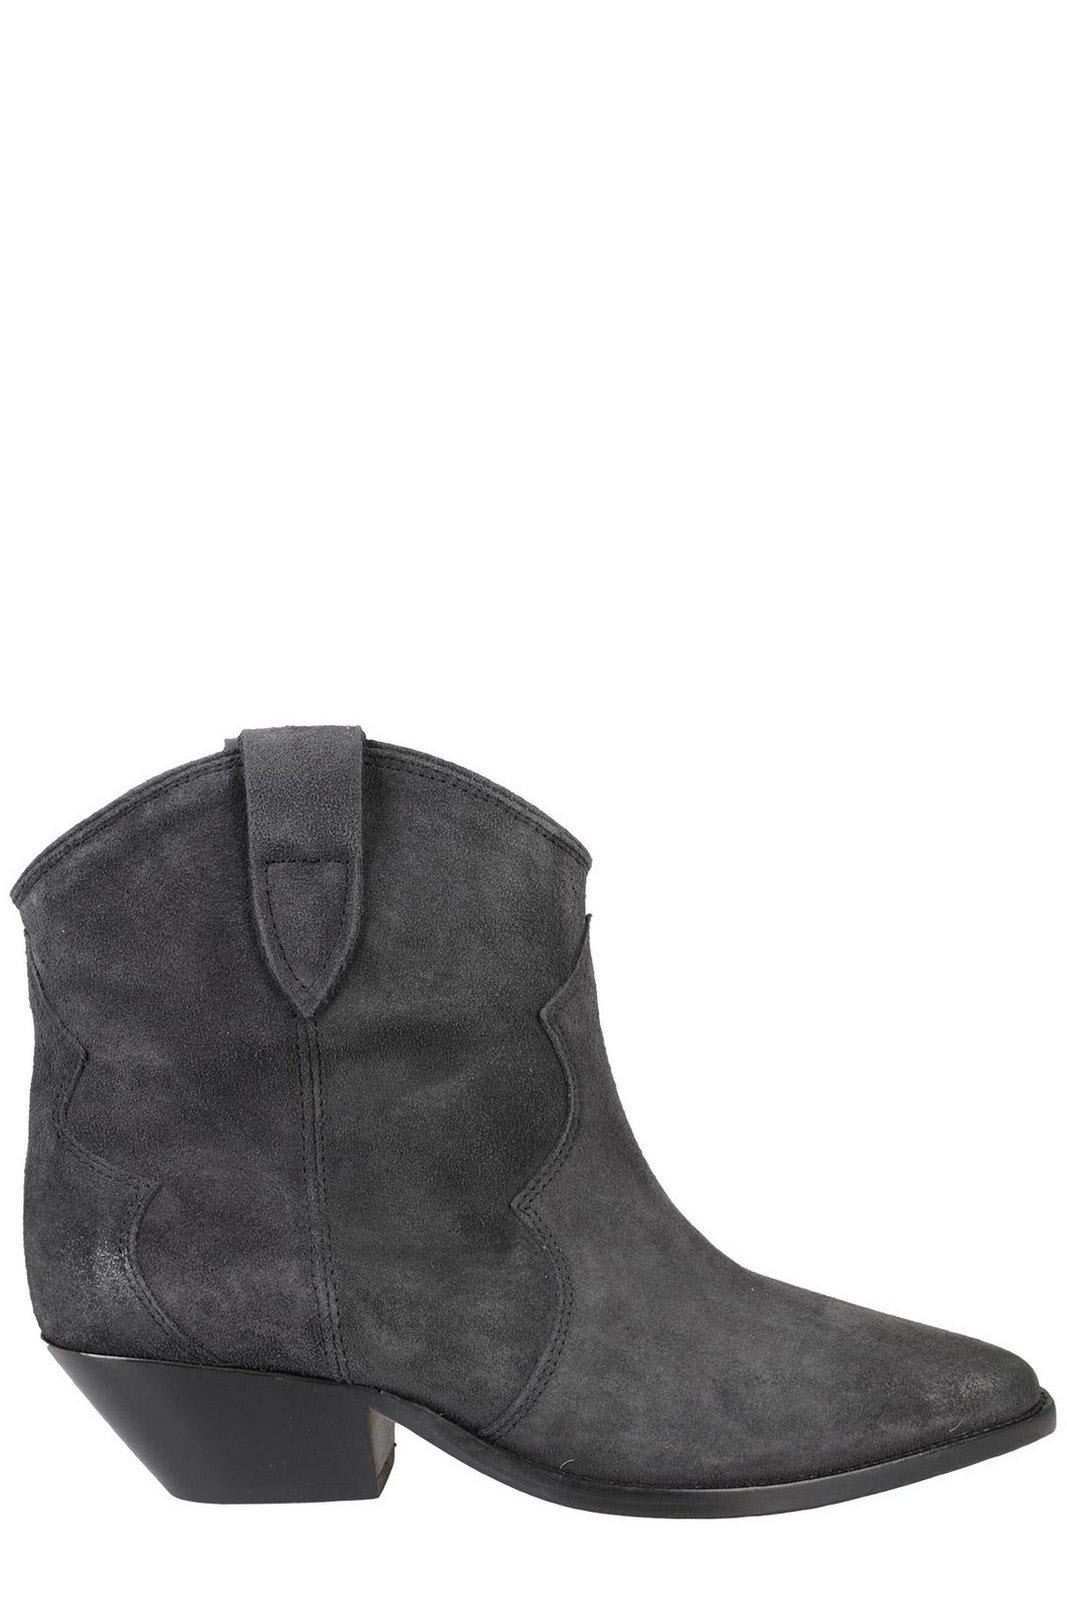 ISABEL MARANT POINTED TOE ANKLE BOOTS